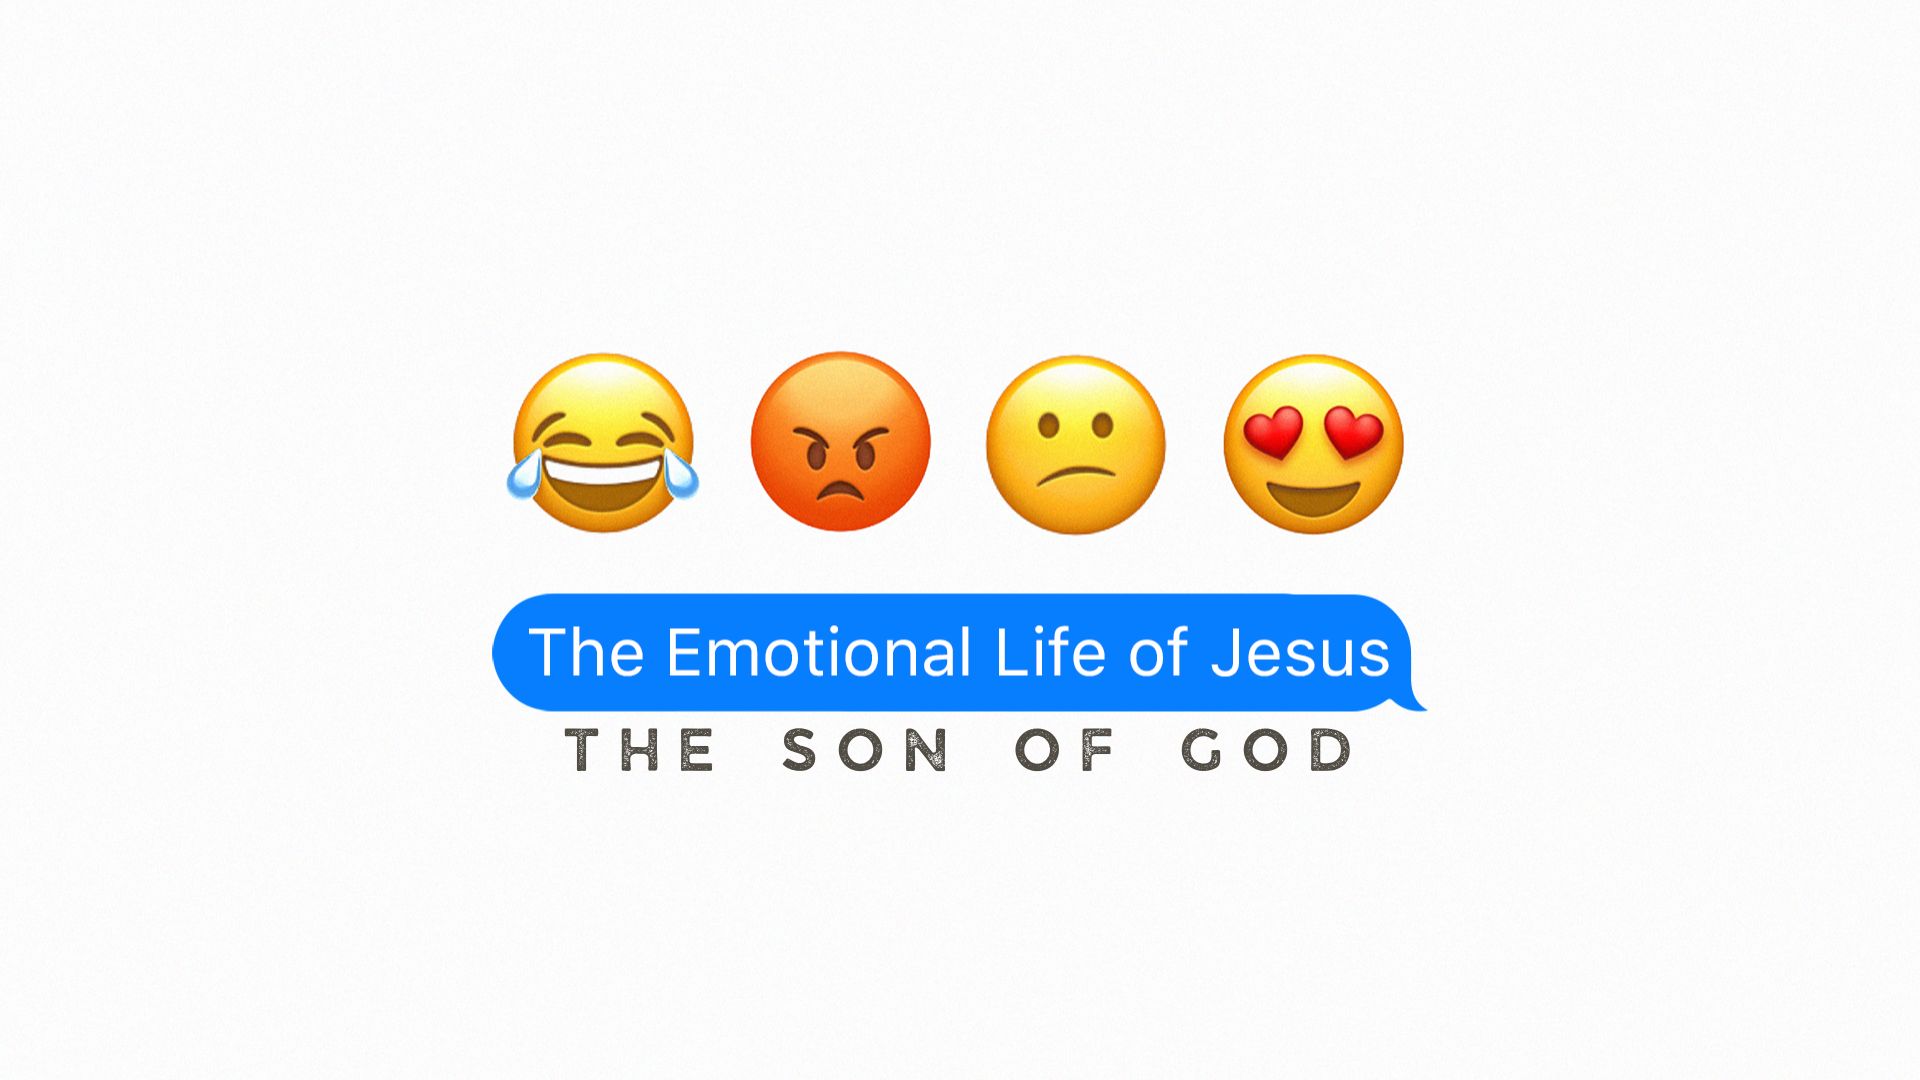 The Emotional Life of Jesus, the Son of God